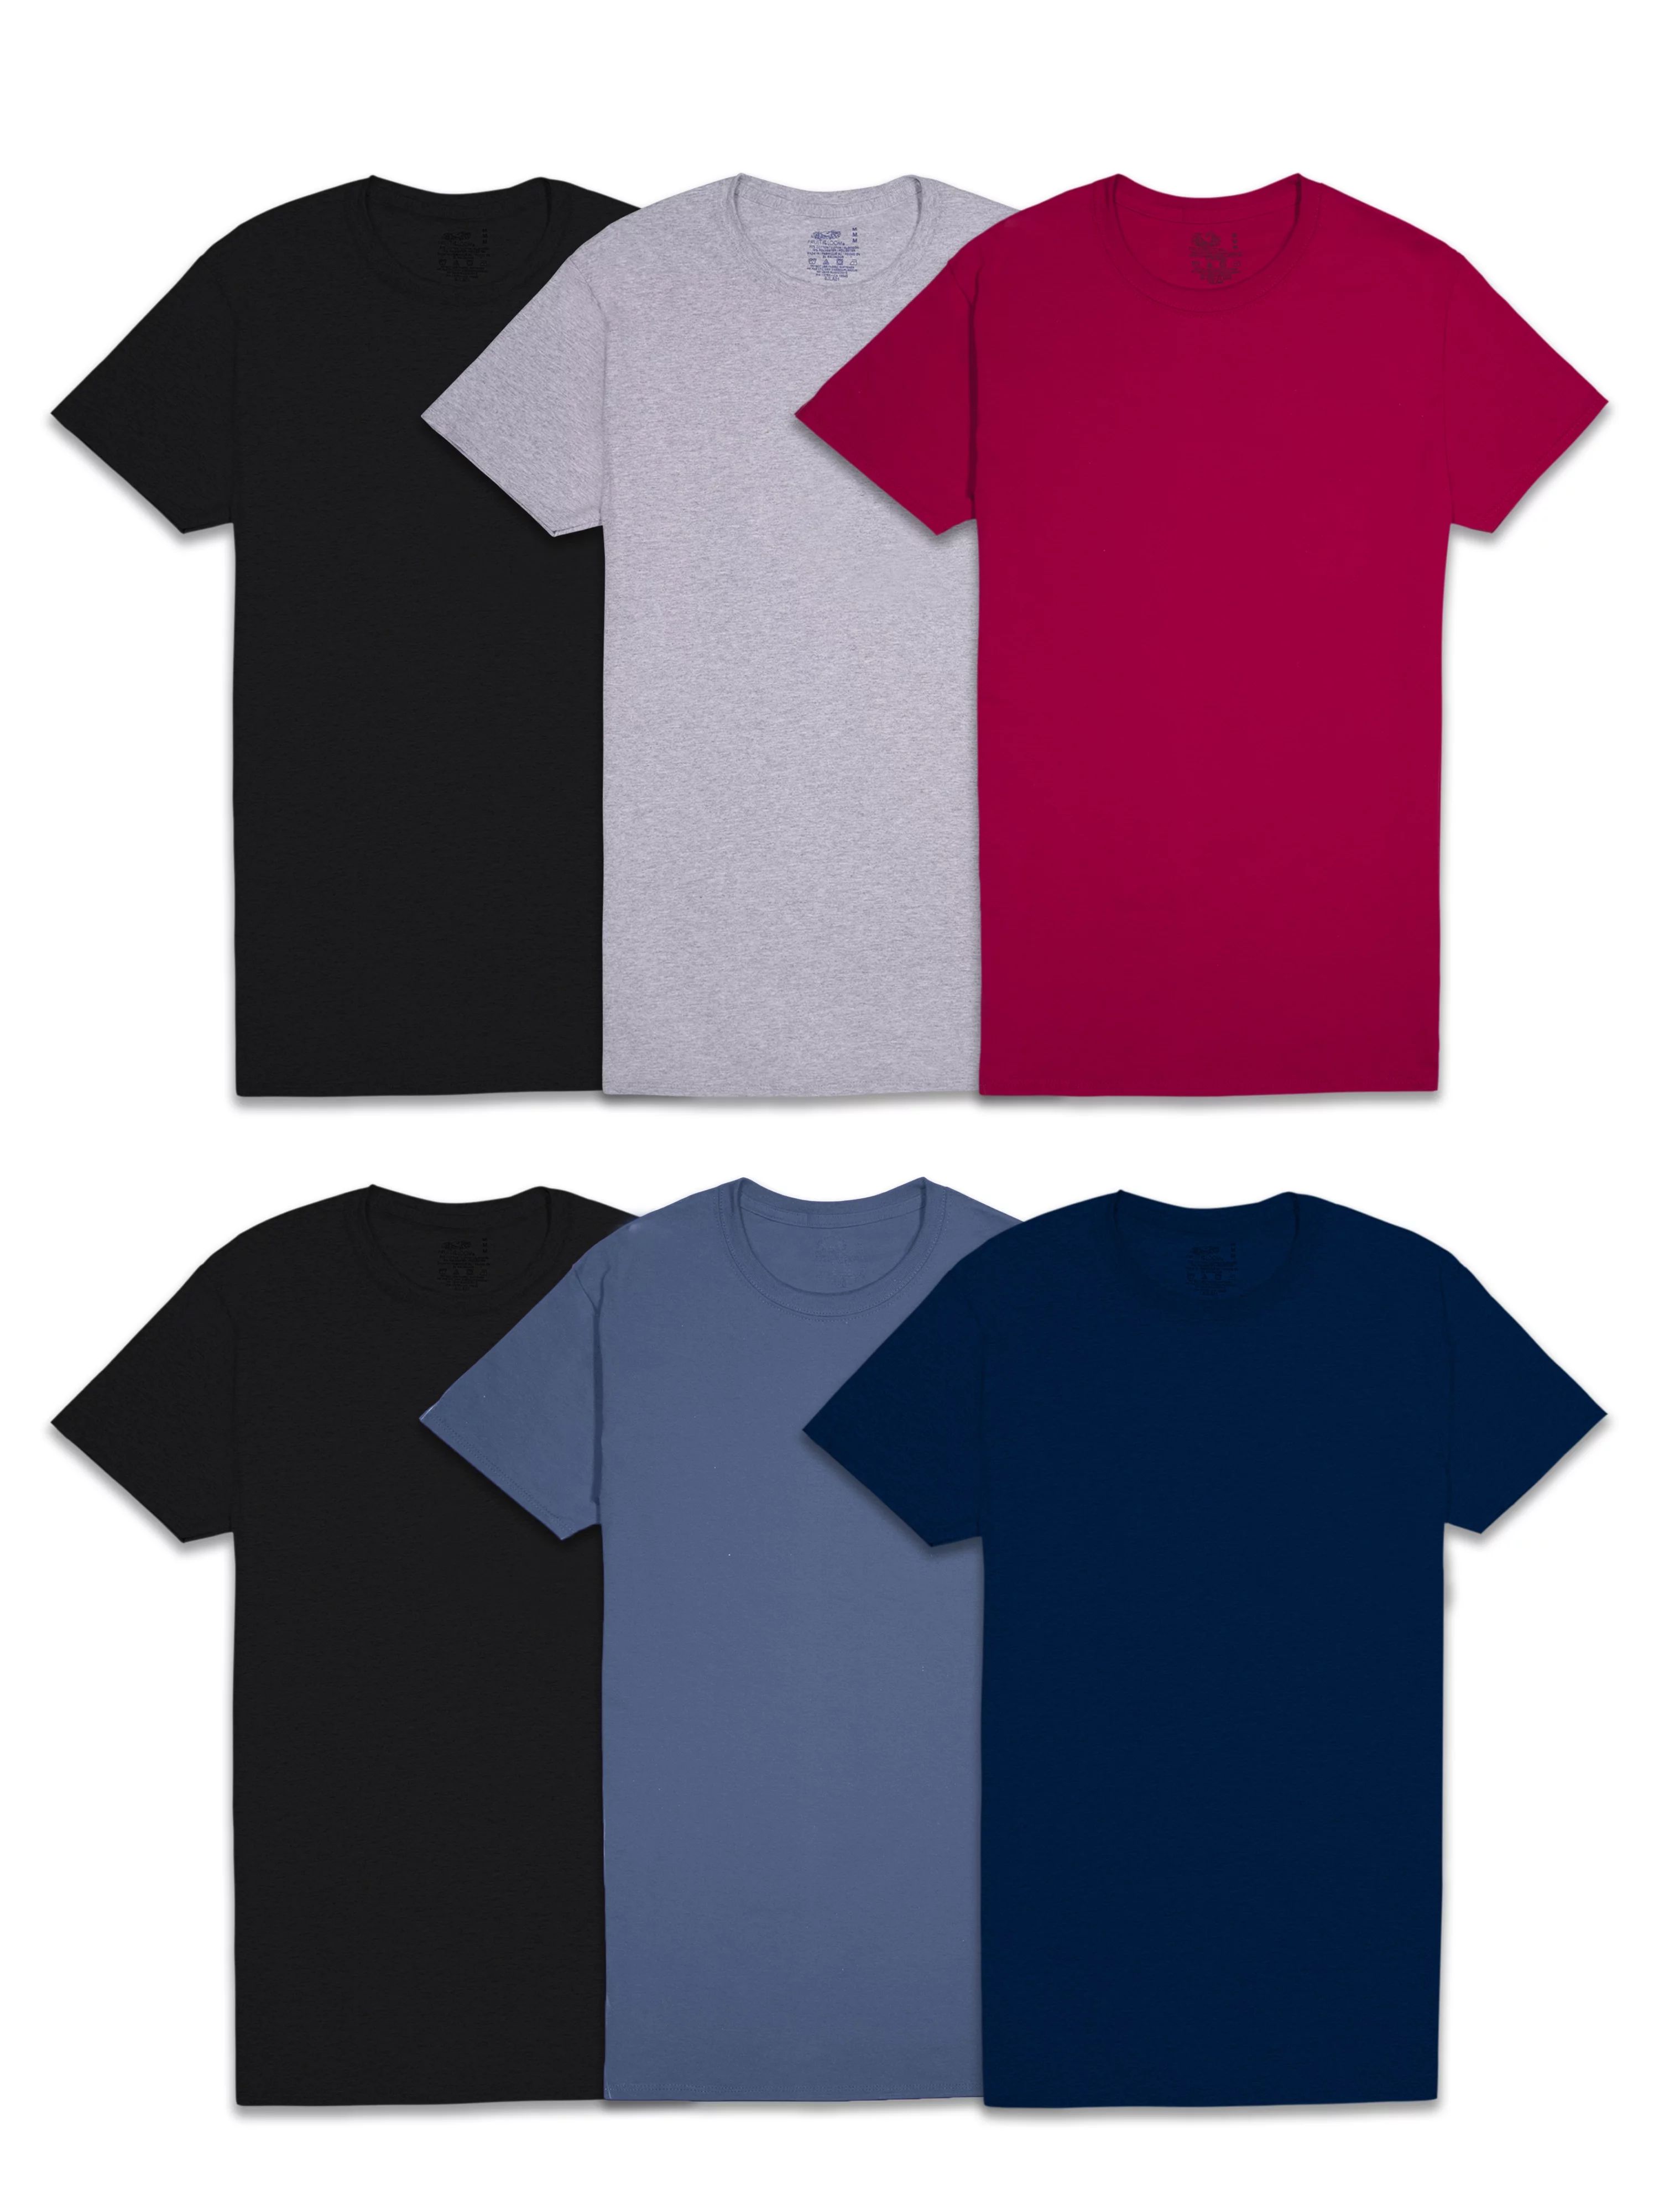 Fruit of the Loom Men's Assorted Color Crew Undershirts, 6 Pack, Sizes S-3XL | Walmart (US)